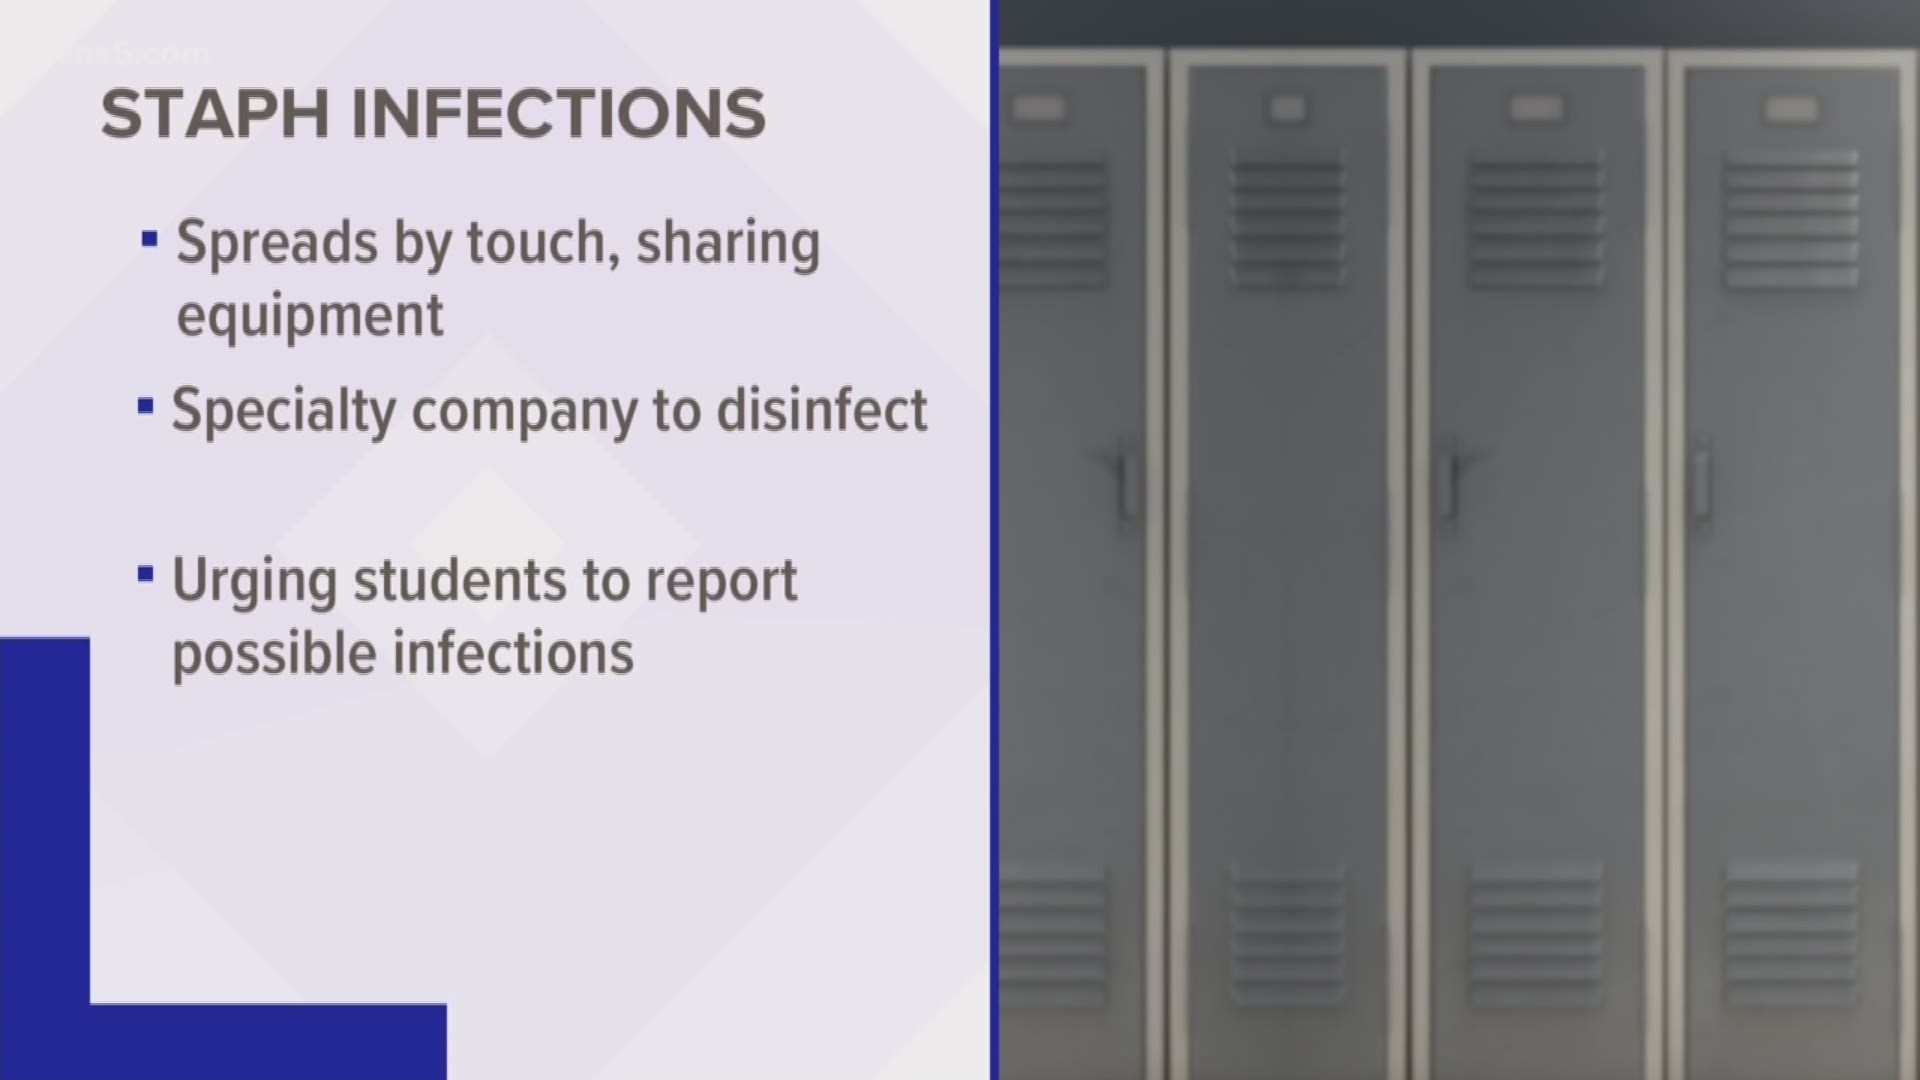 Navarro ISD's superintendent said all of the cases are being appropriately treated.